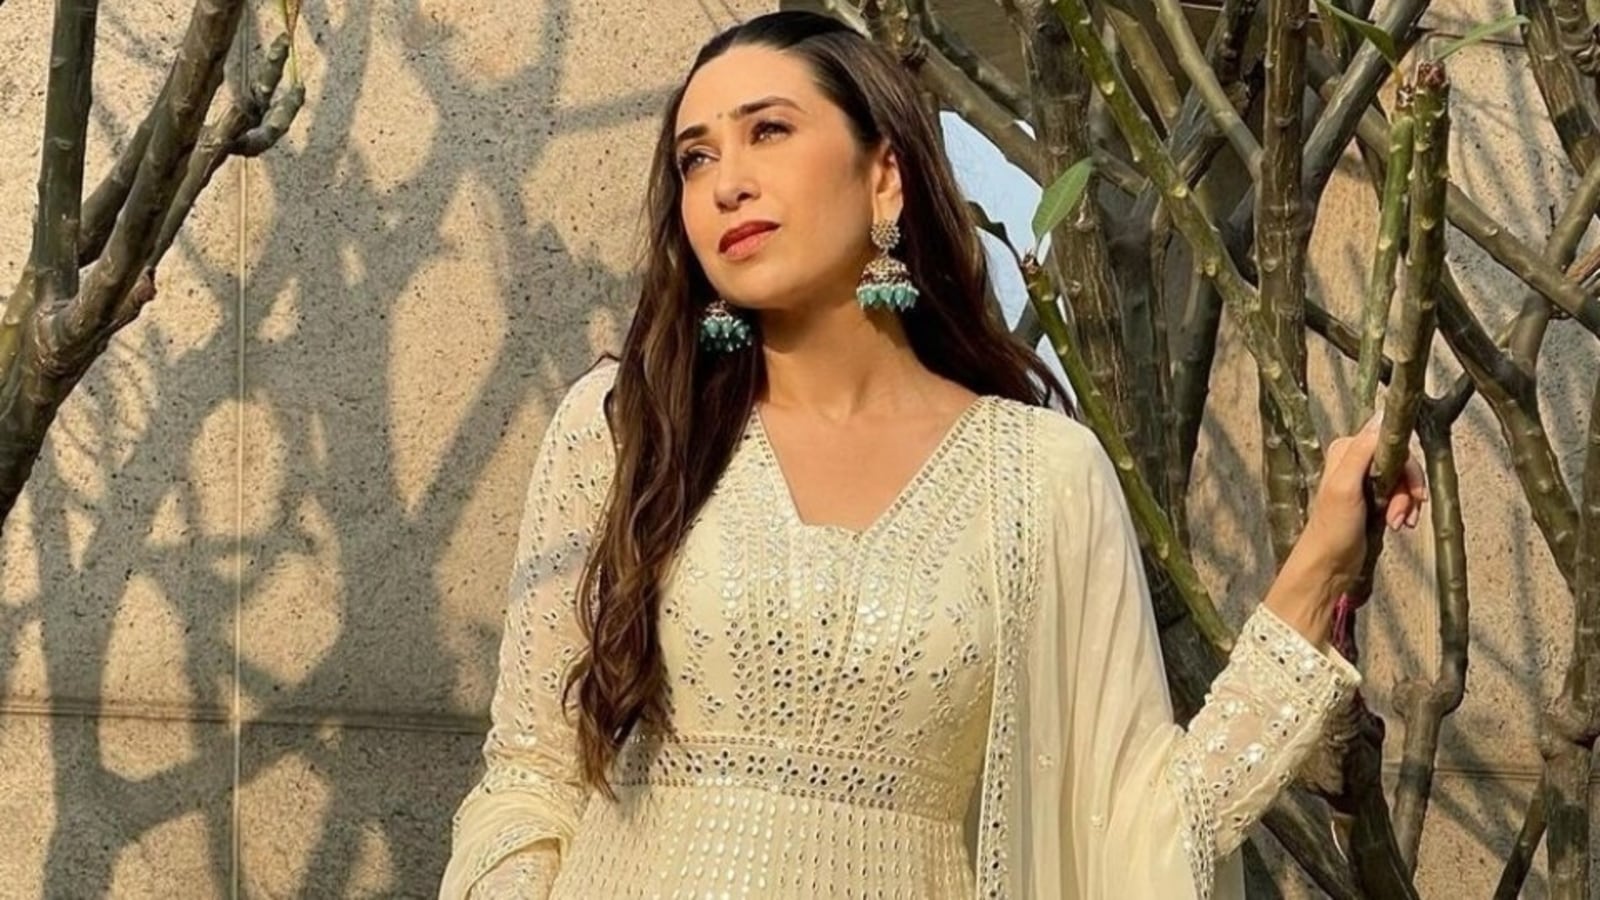 An all-time icon, here's Karisma Kapoor making a serious style statement in  The Loom. Shop now . . 𝐂𝐥𝐢𝐜𝐤 𝐨𝐧 𝐭�... | Instagram